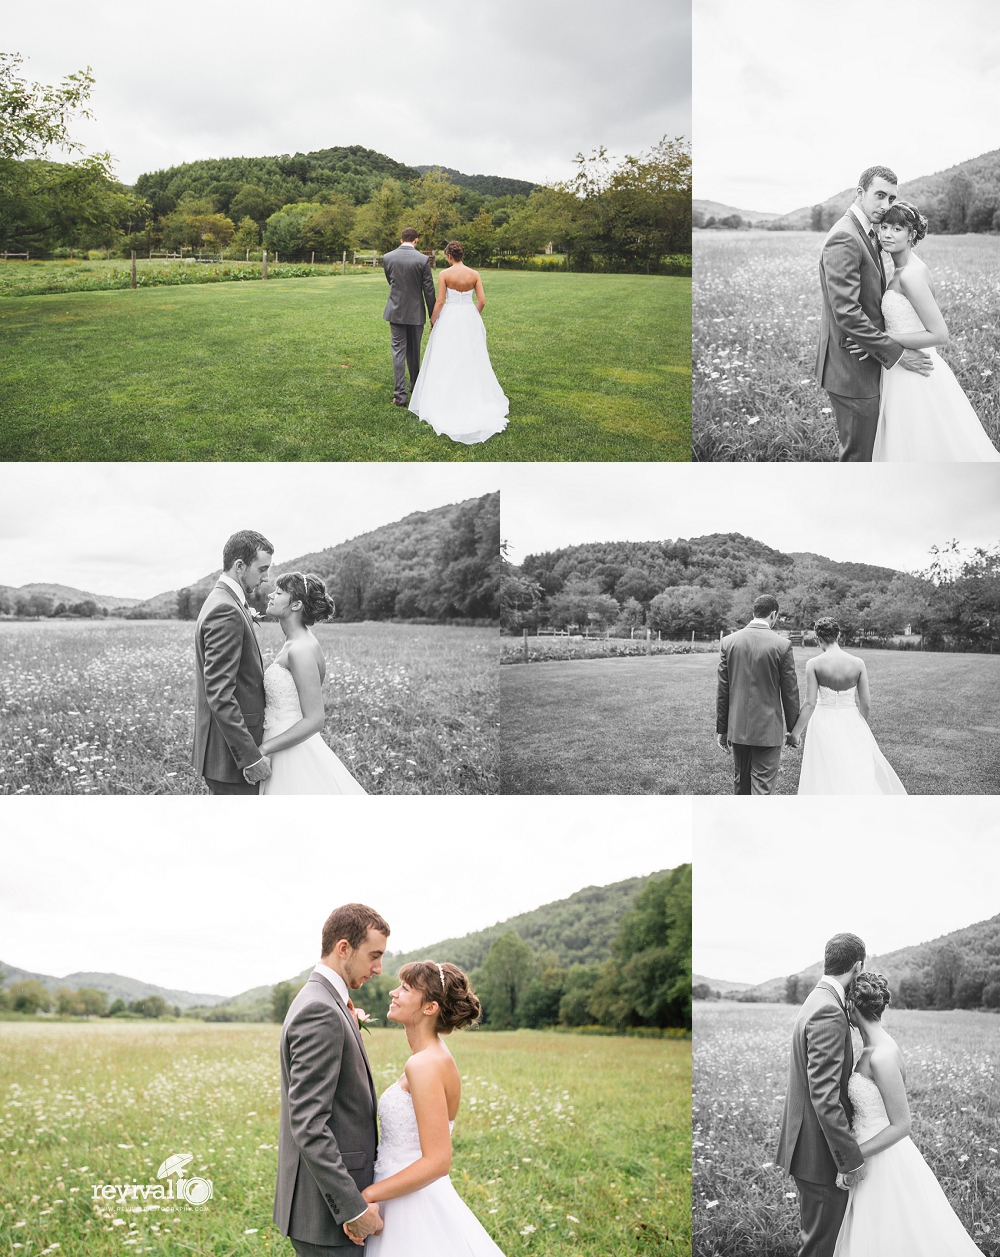 Photo by Revival Photography Weddings in Valle Crucis North Carolina Intimate Weddings Garden Weddings www.revivalphotography.com